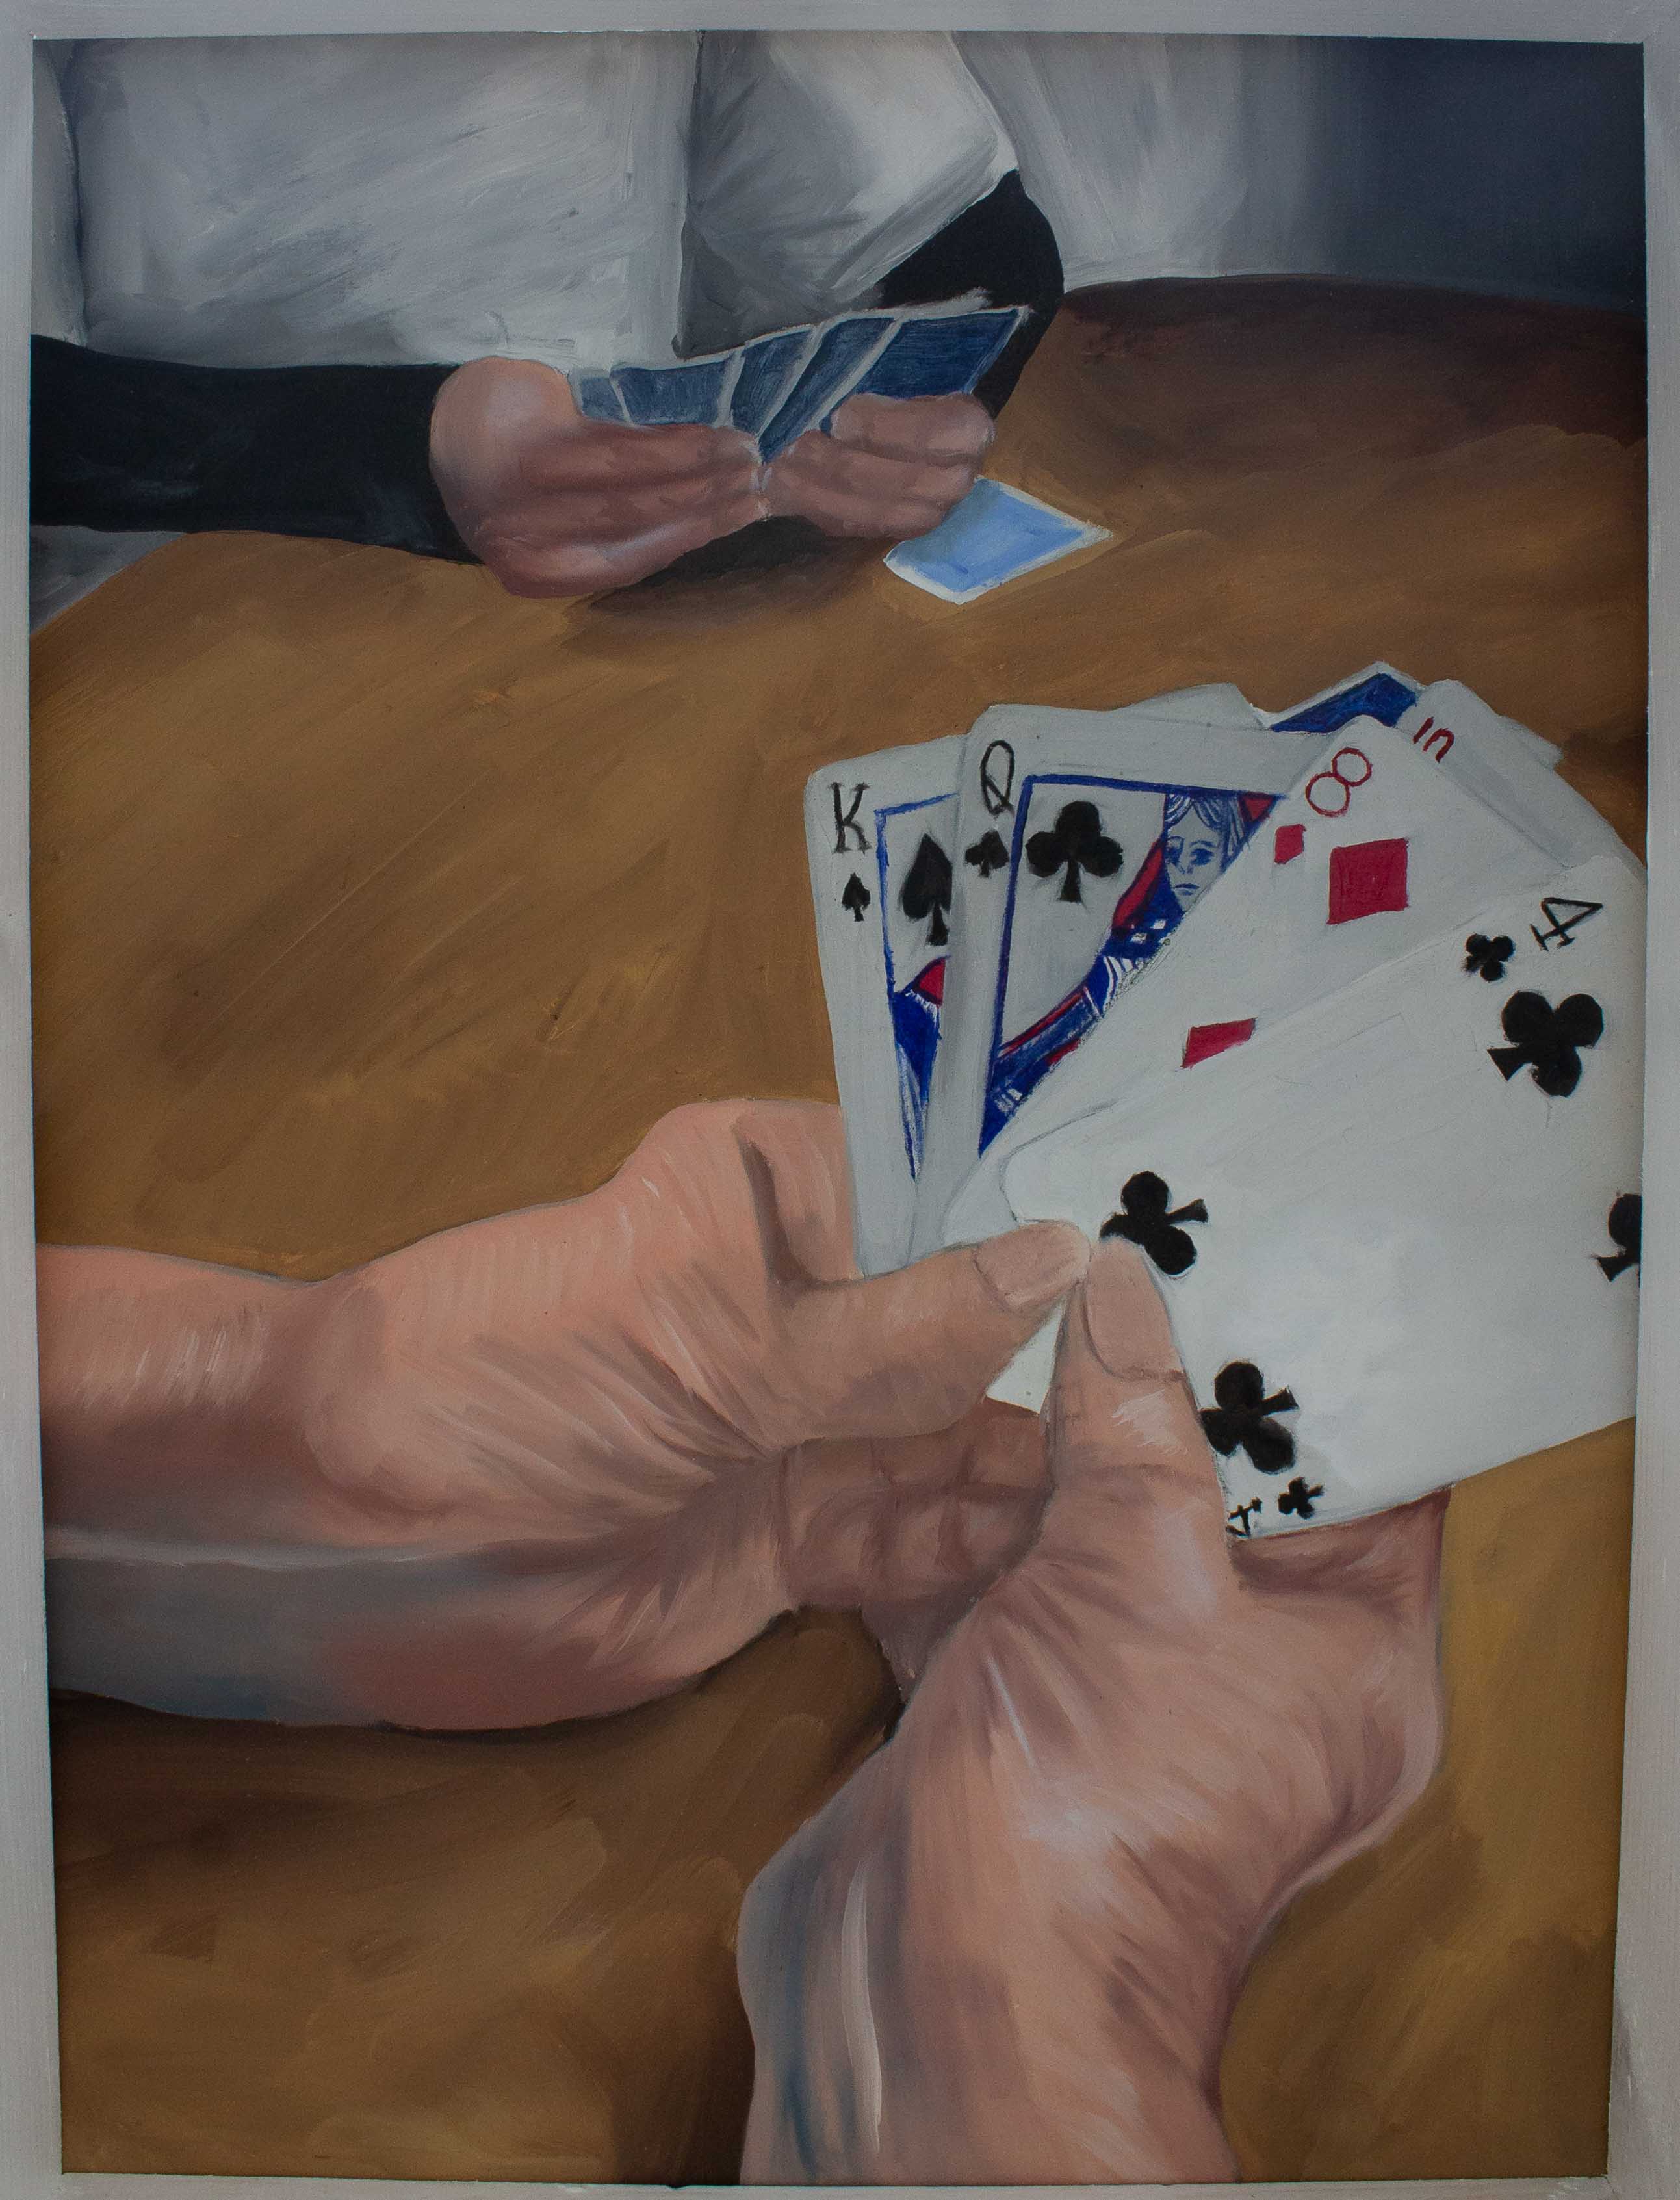 This is an image of just the painting. The painting shows an older person’s hands holding playing cards, they are a king, a queen, an eight, a four, and a ten. There is another person sat across from the hands playing the game as well. Both panels are slid out of the box. The painting is no longer obstructed by the plexiglass. The frontmost hands are wrinkly and veins are visible. They are both playing on a wooden table. The person in the back is wearing a white t-shirt and the back of their cards are blue. The painting has a very neutral color pallet.